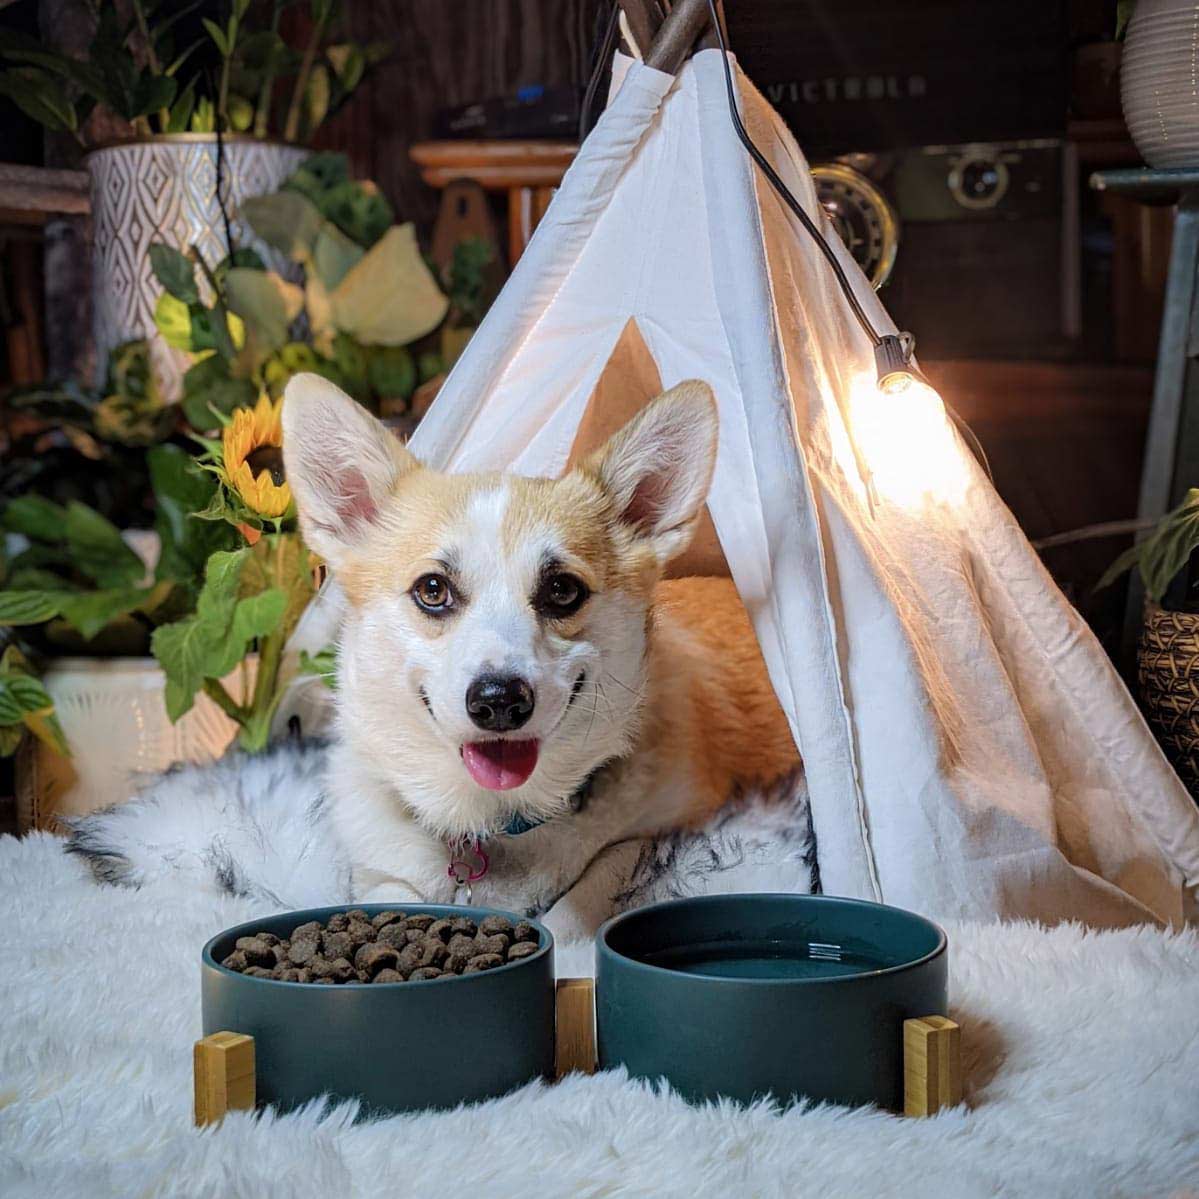 a Corgi lying in the tent with the SpunkyJunky's cute green pet bowl set in front of it